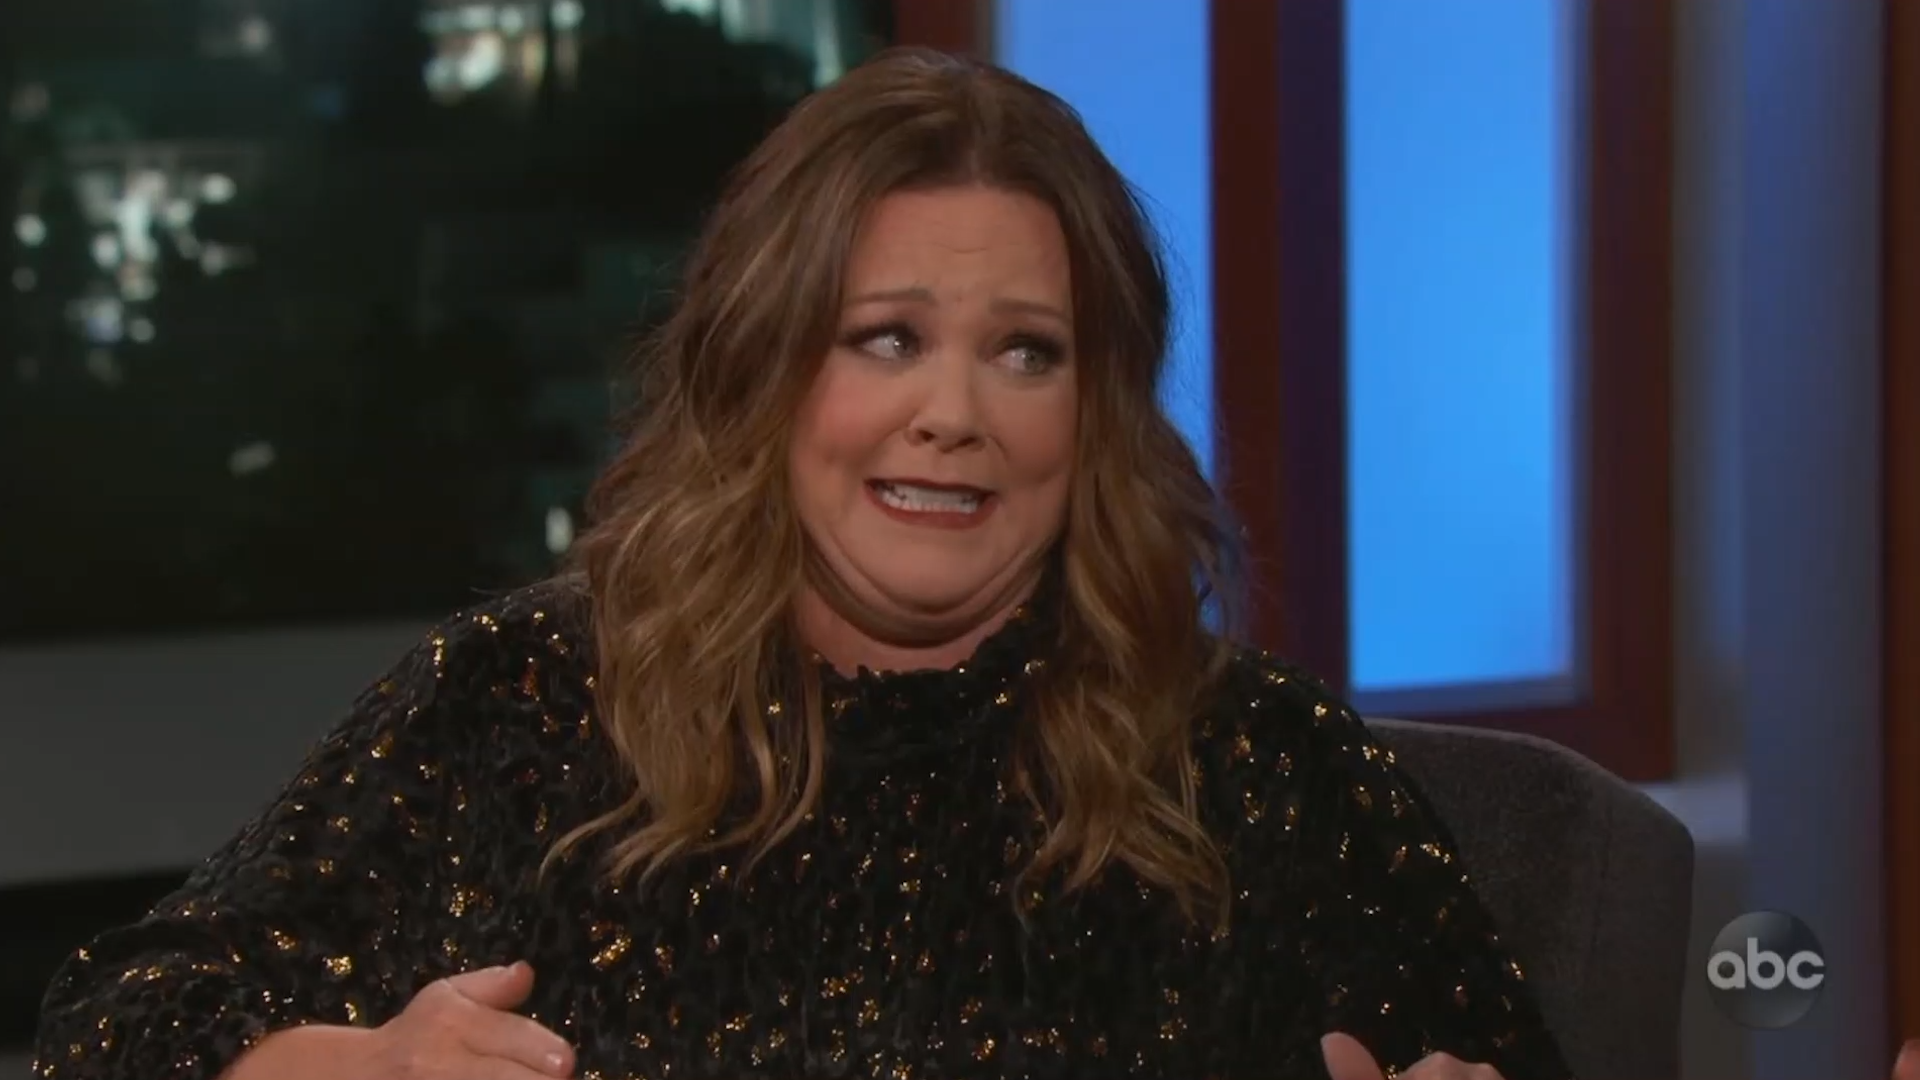 10. Melissa McCarthy's Blue Hair: Why It's More Than Just a Fashion Statement - wide 7